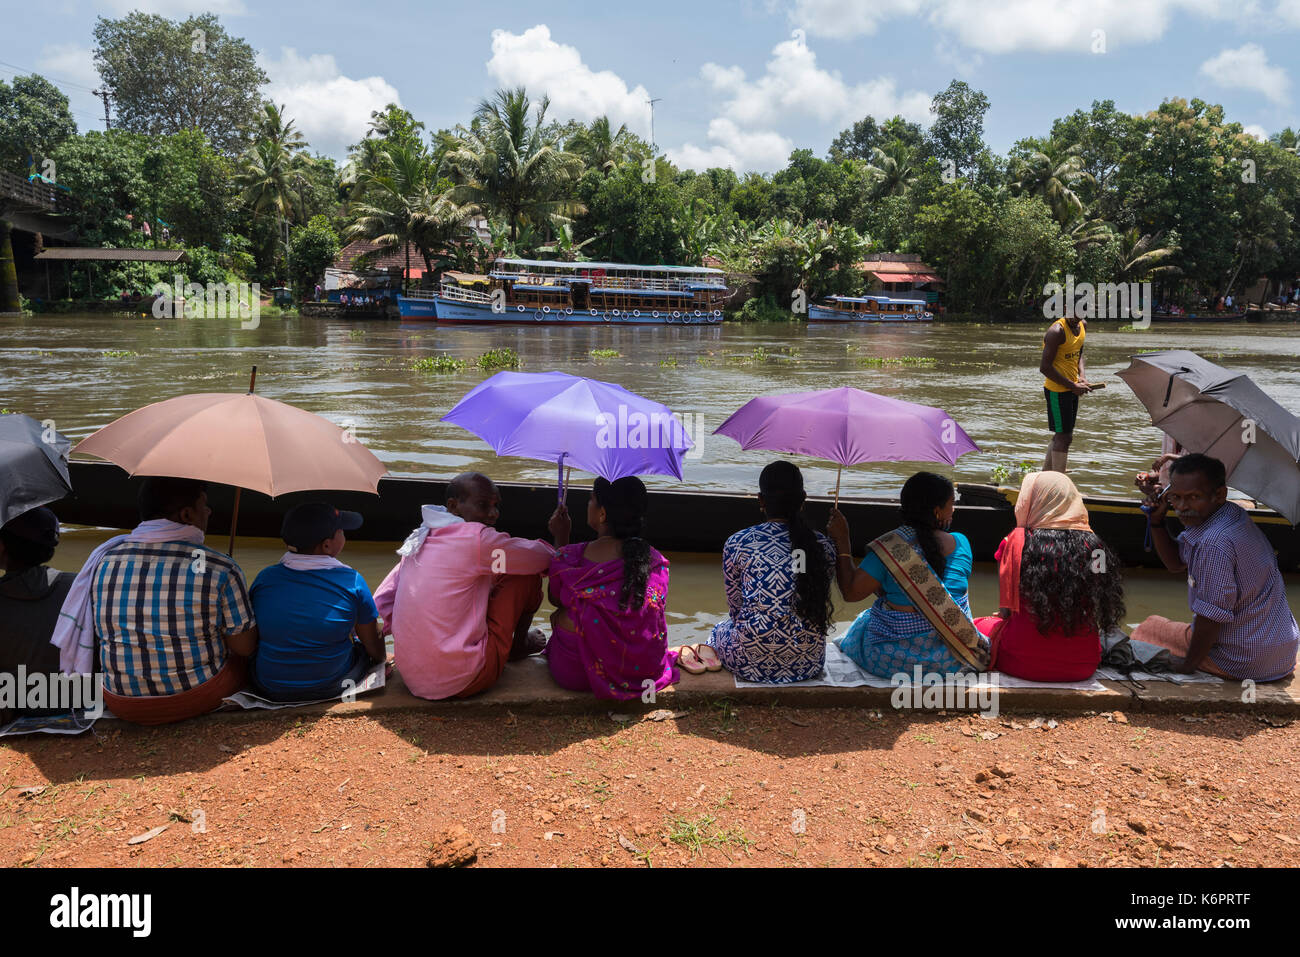 People waiting for the boat race to begin on a very sunny day by taking shade under their umbrellas. Stock Photo